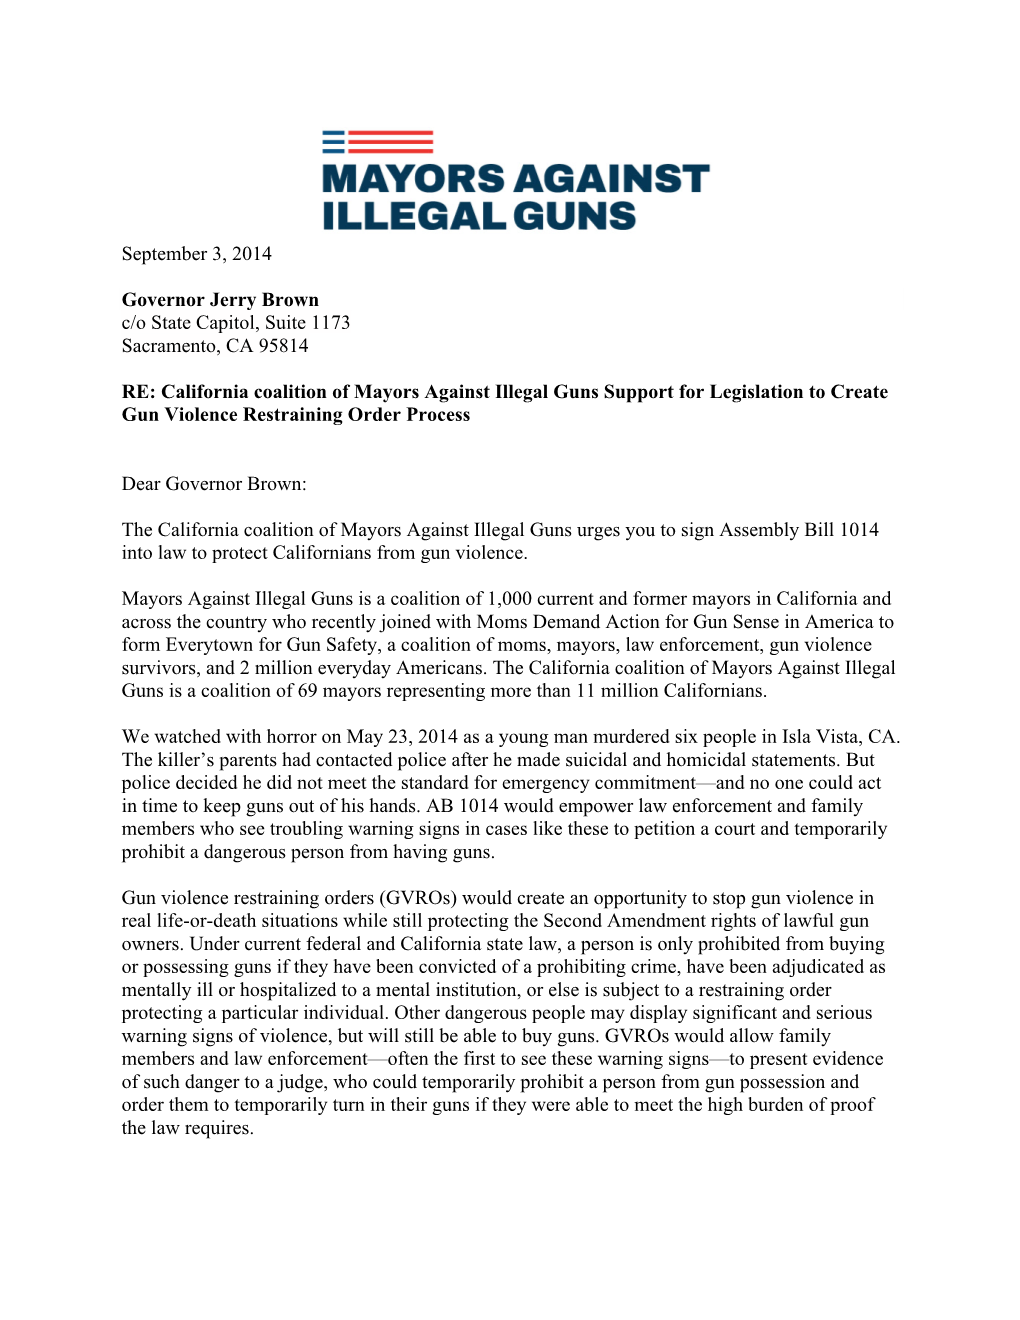 California Coalition of Mayors Against Illegal Guns Support for Legislation to Create Gun Violence Restraining Order Process